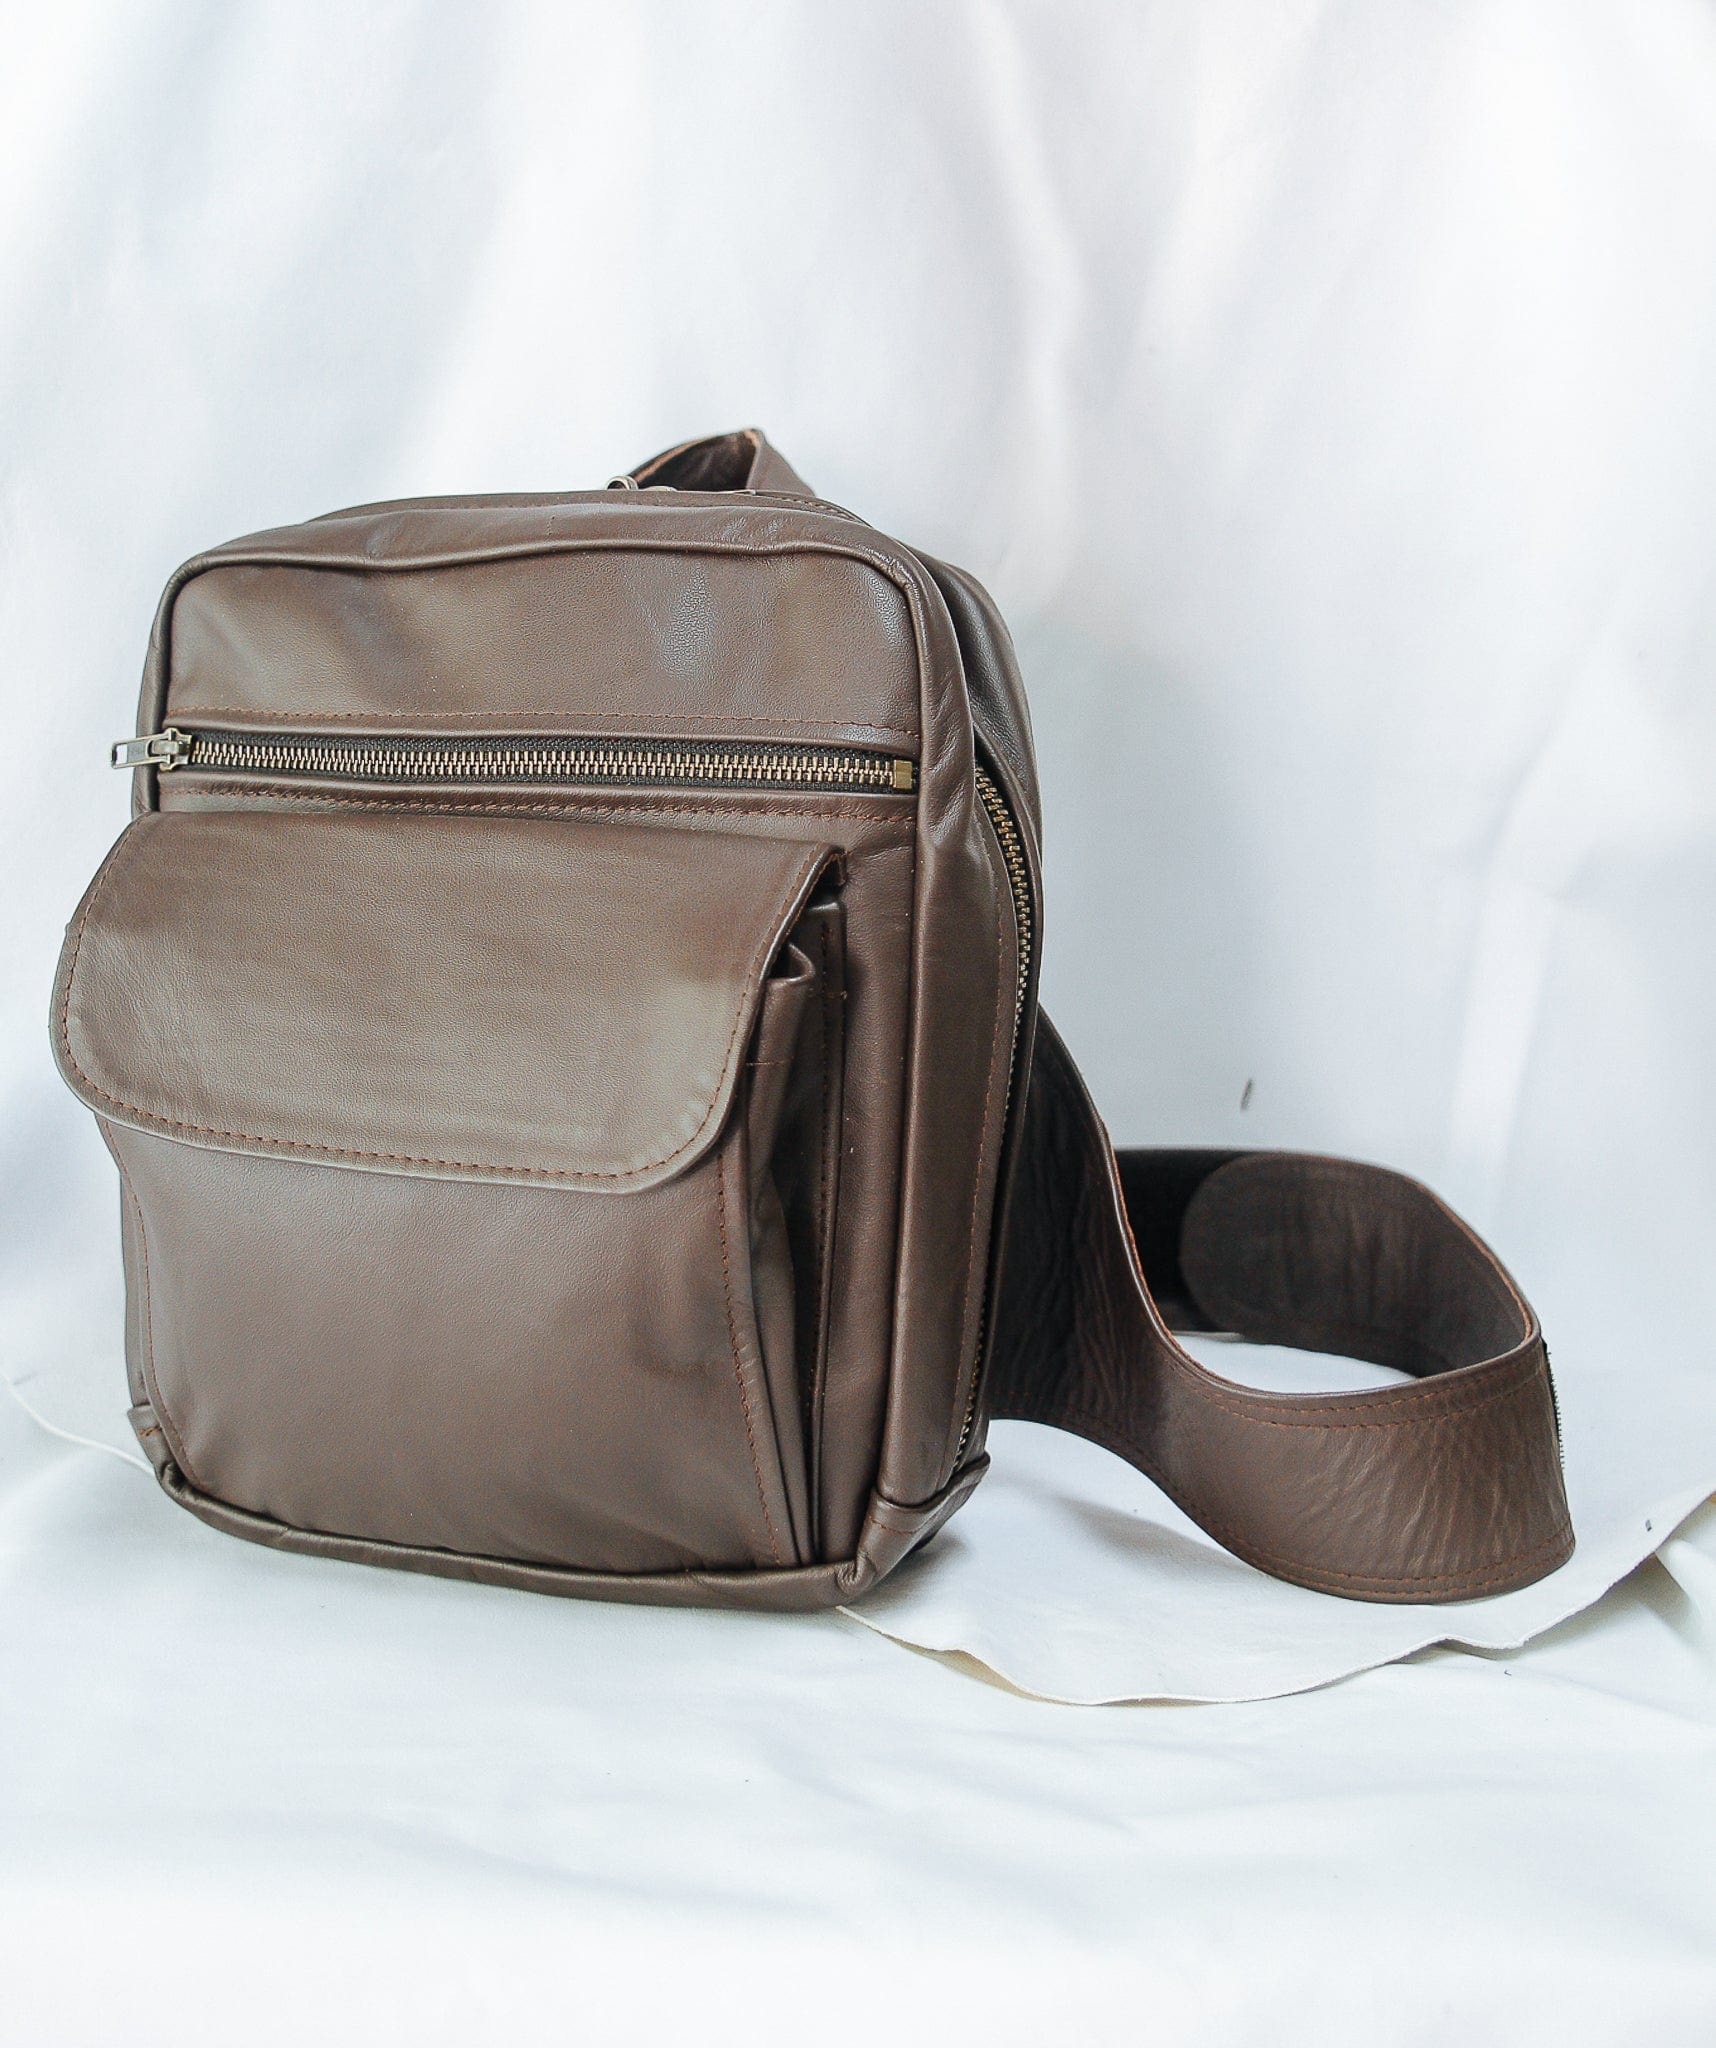 The Real McCaul Back Packs Dark Brown / Brass Crossover Backpack - Small - Cowhide Australian Made Australian Owned Leather ManBag Crossover Backpack Australian Made